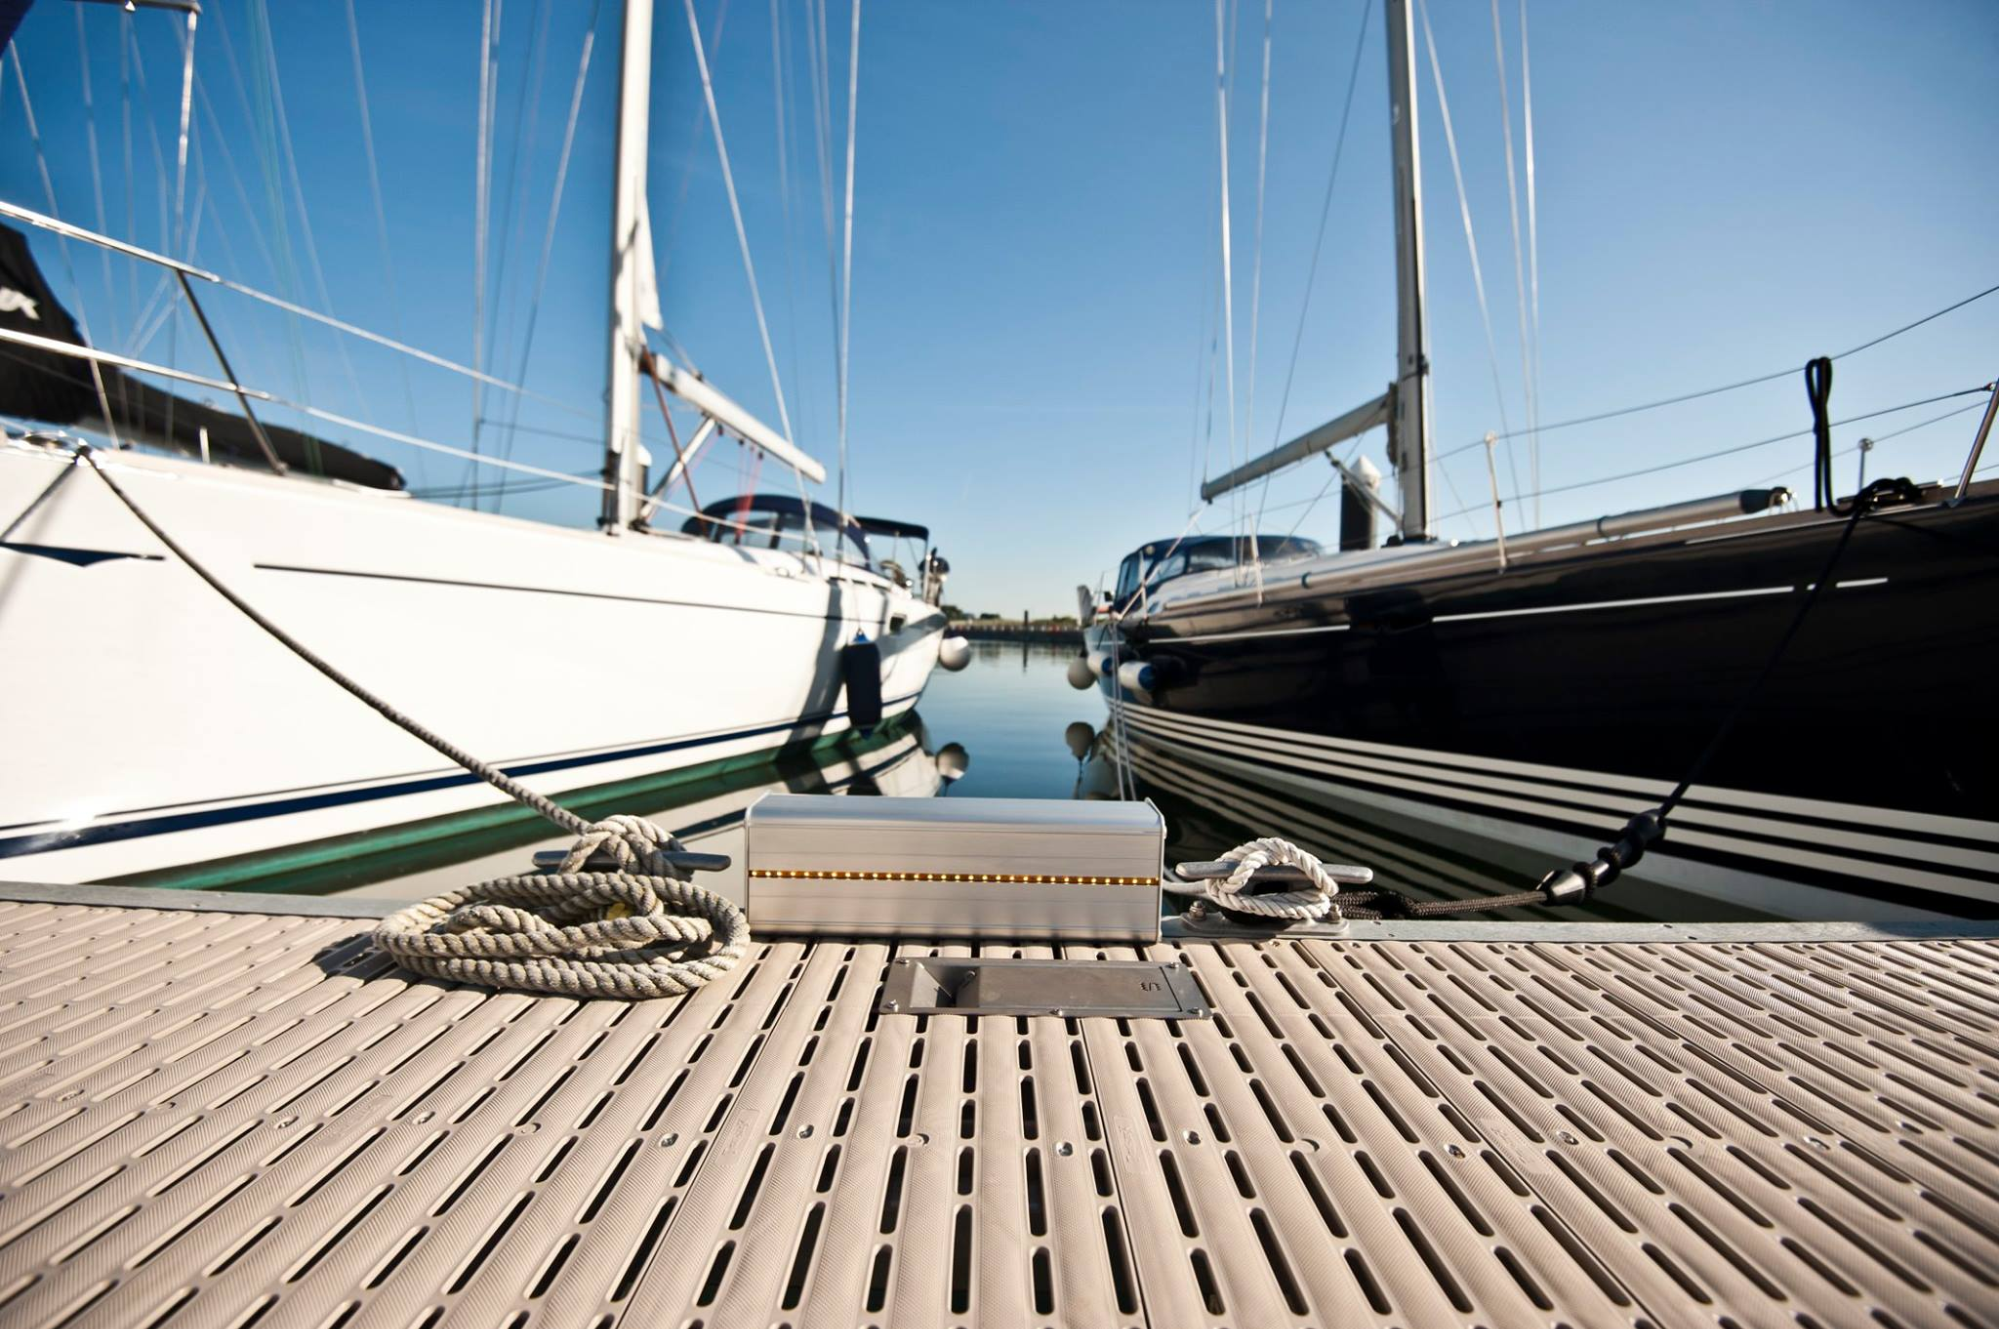 The view of two sailboats from the dock’s level. 